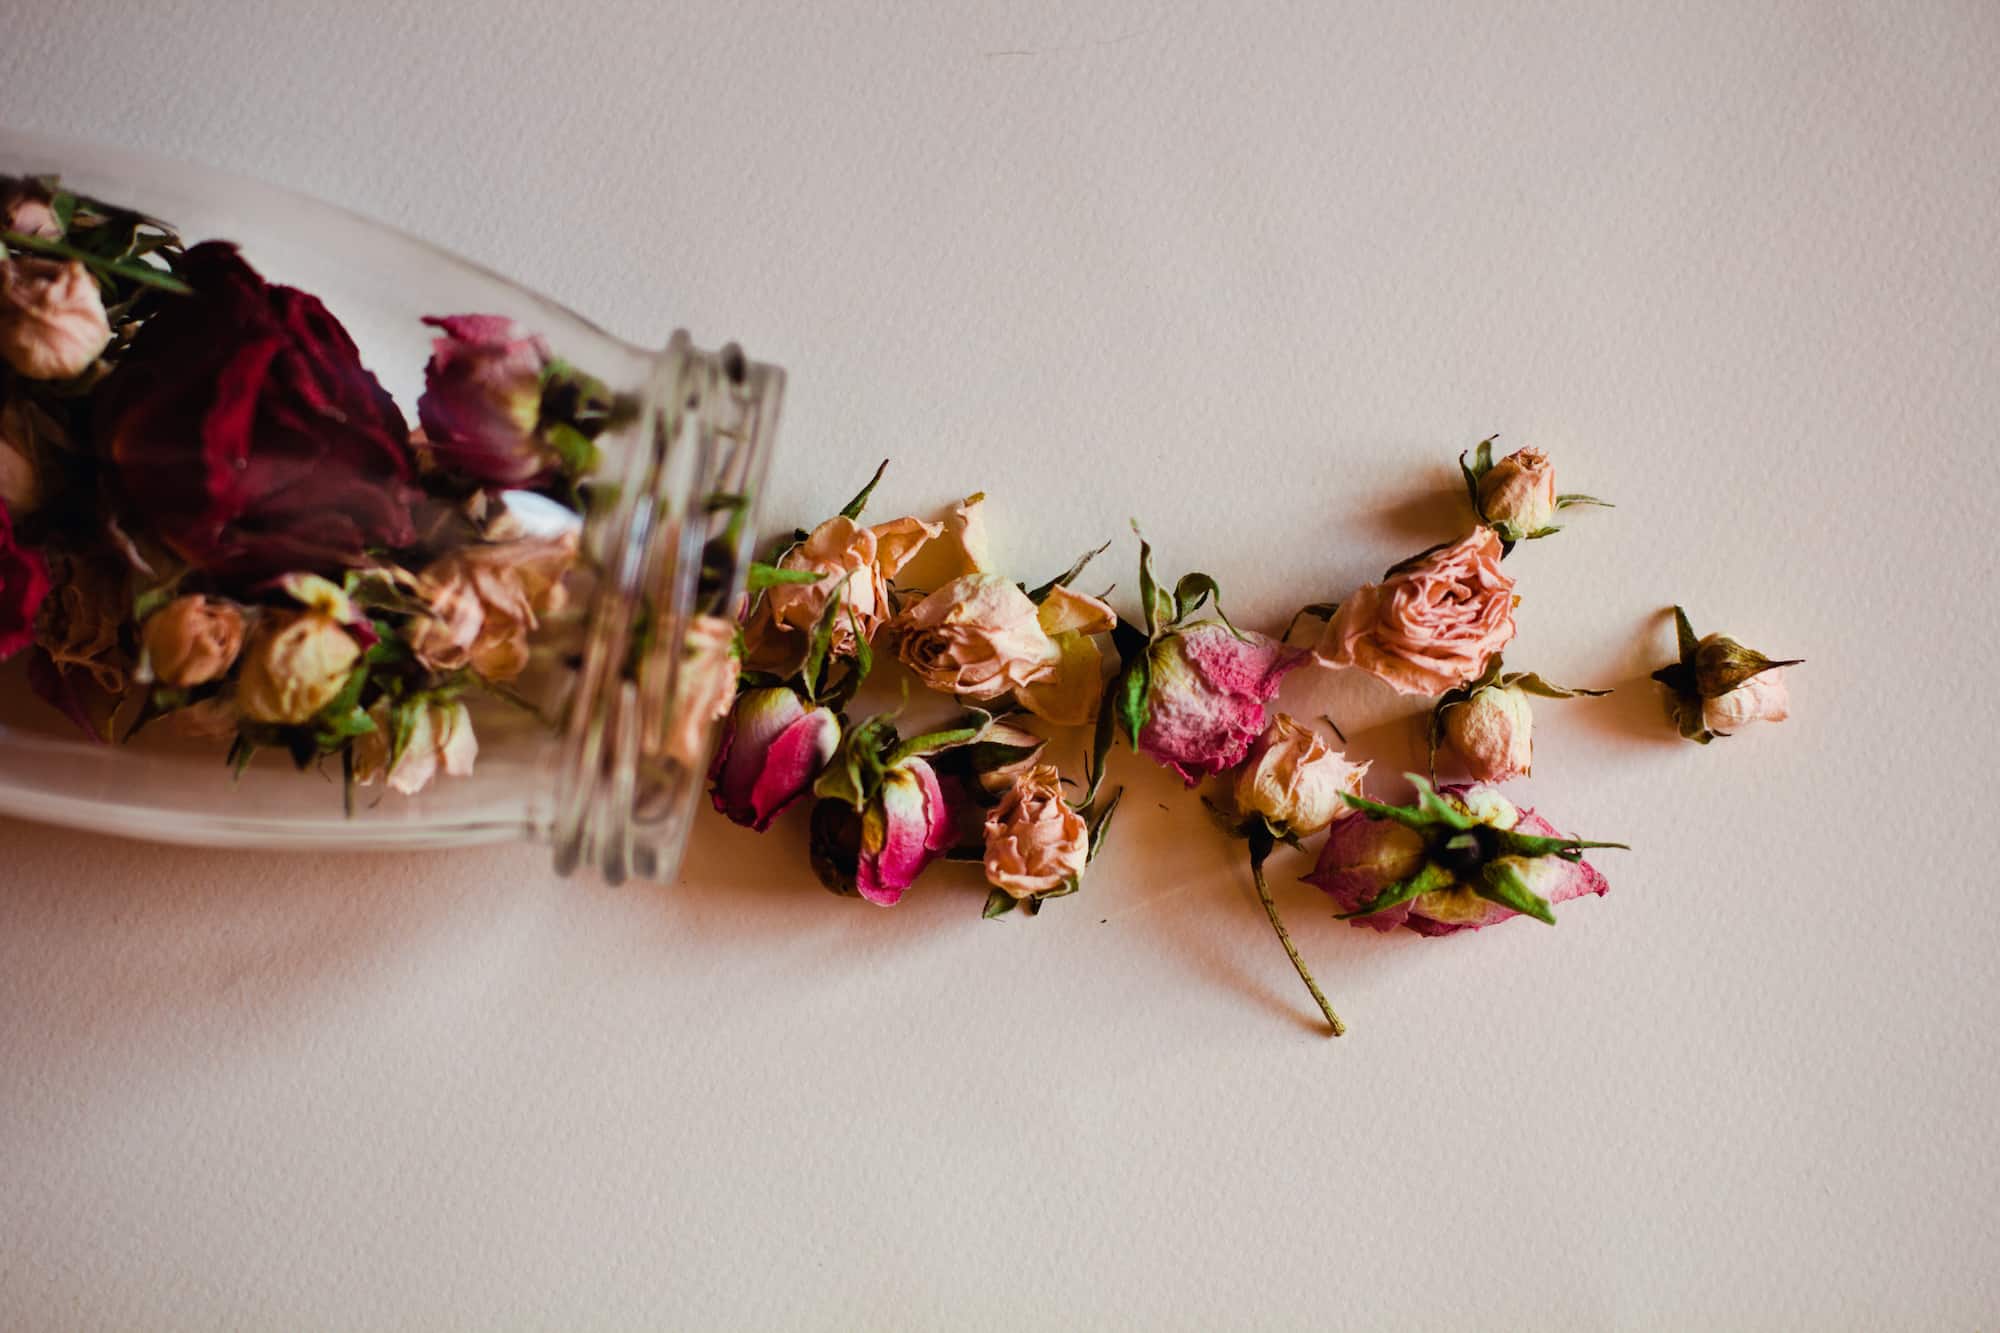 How To Store Rose Petals